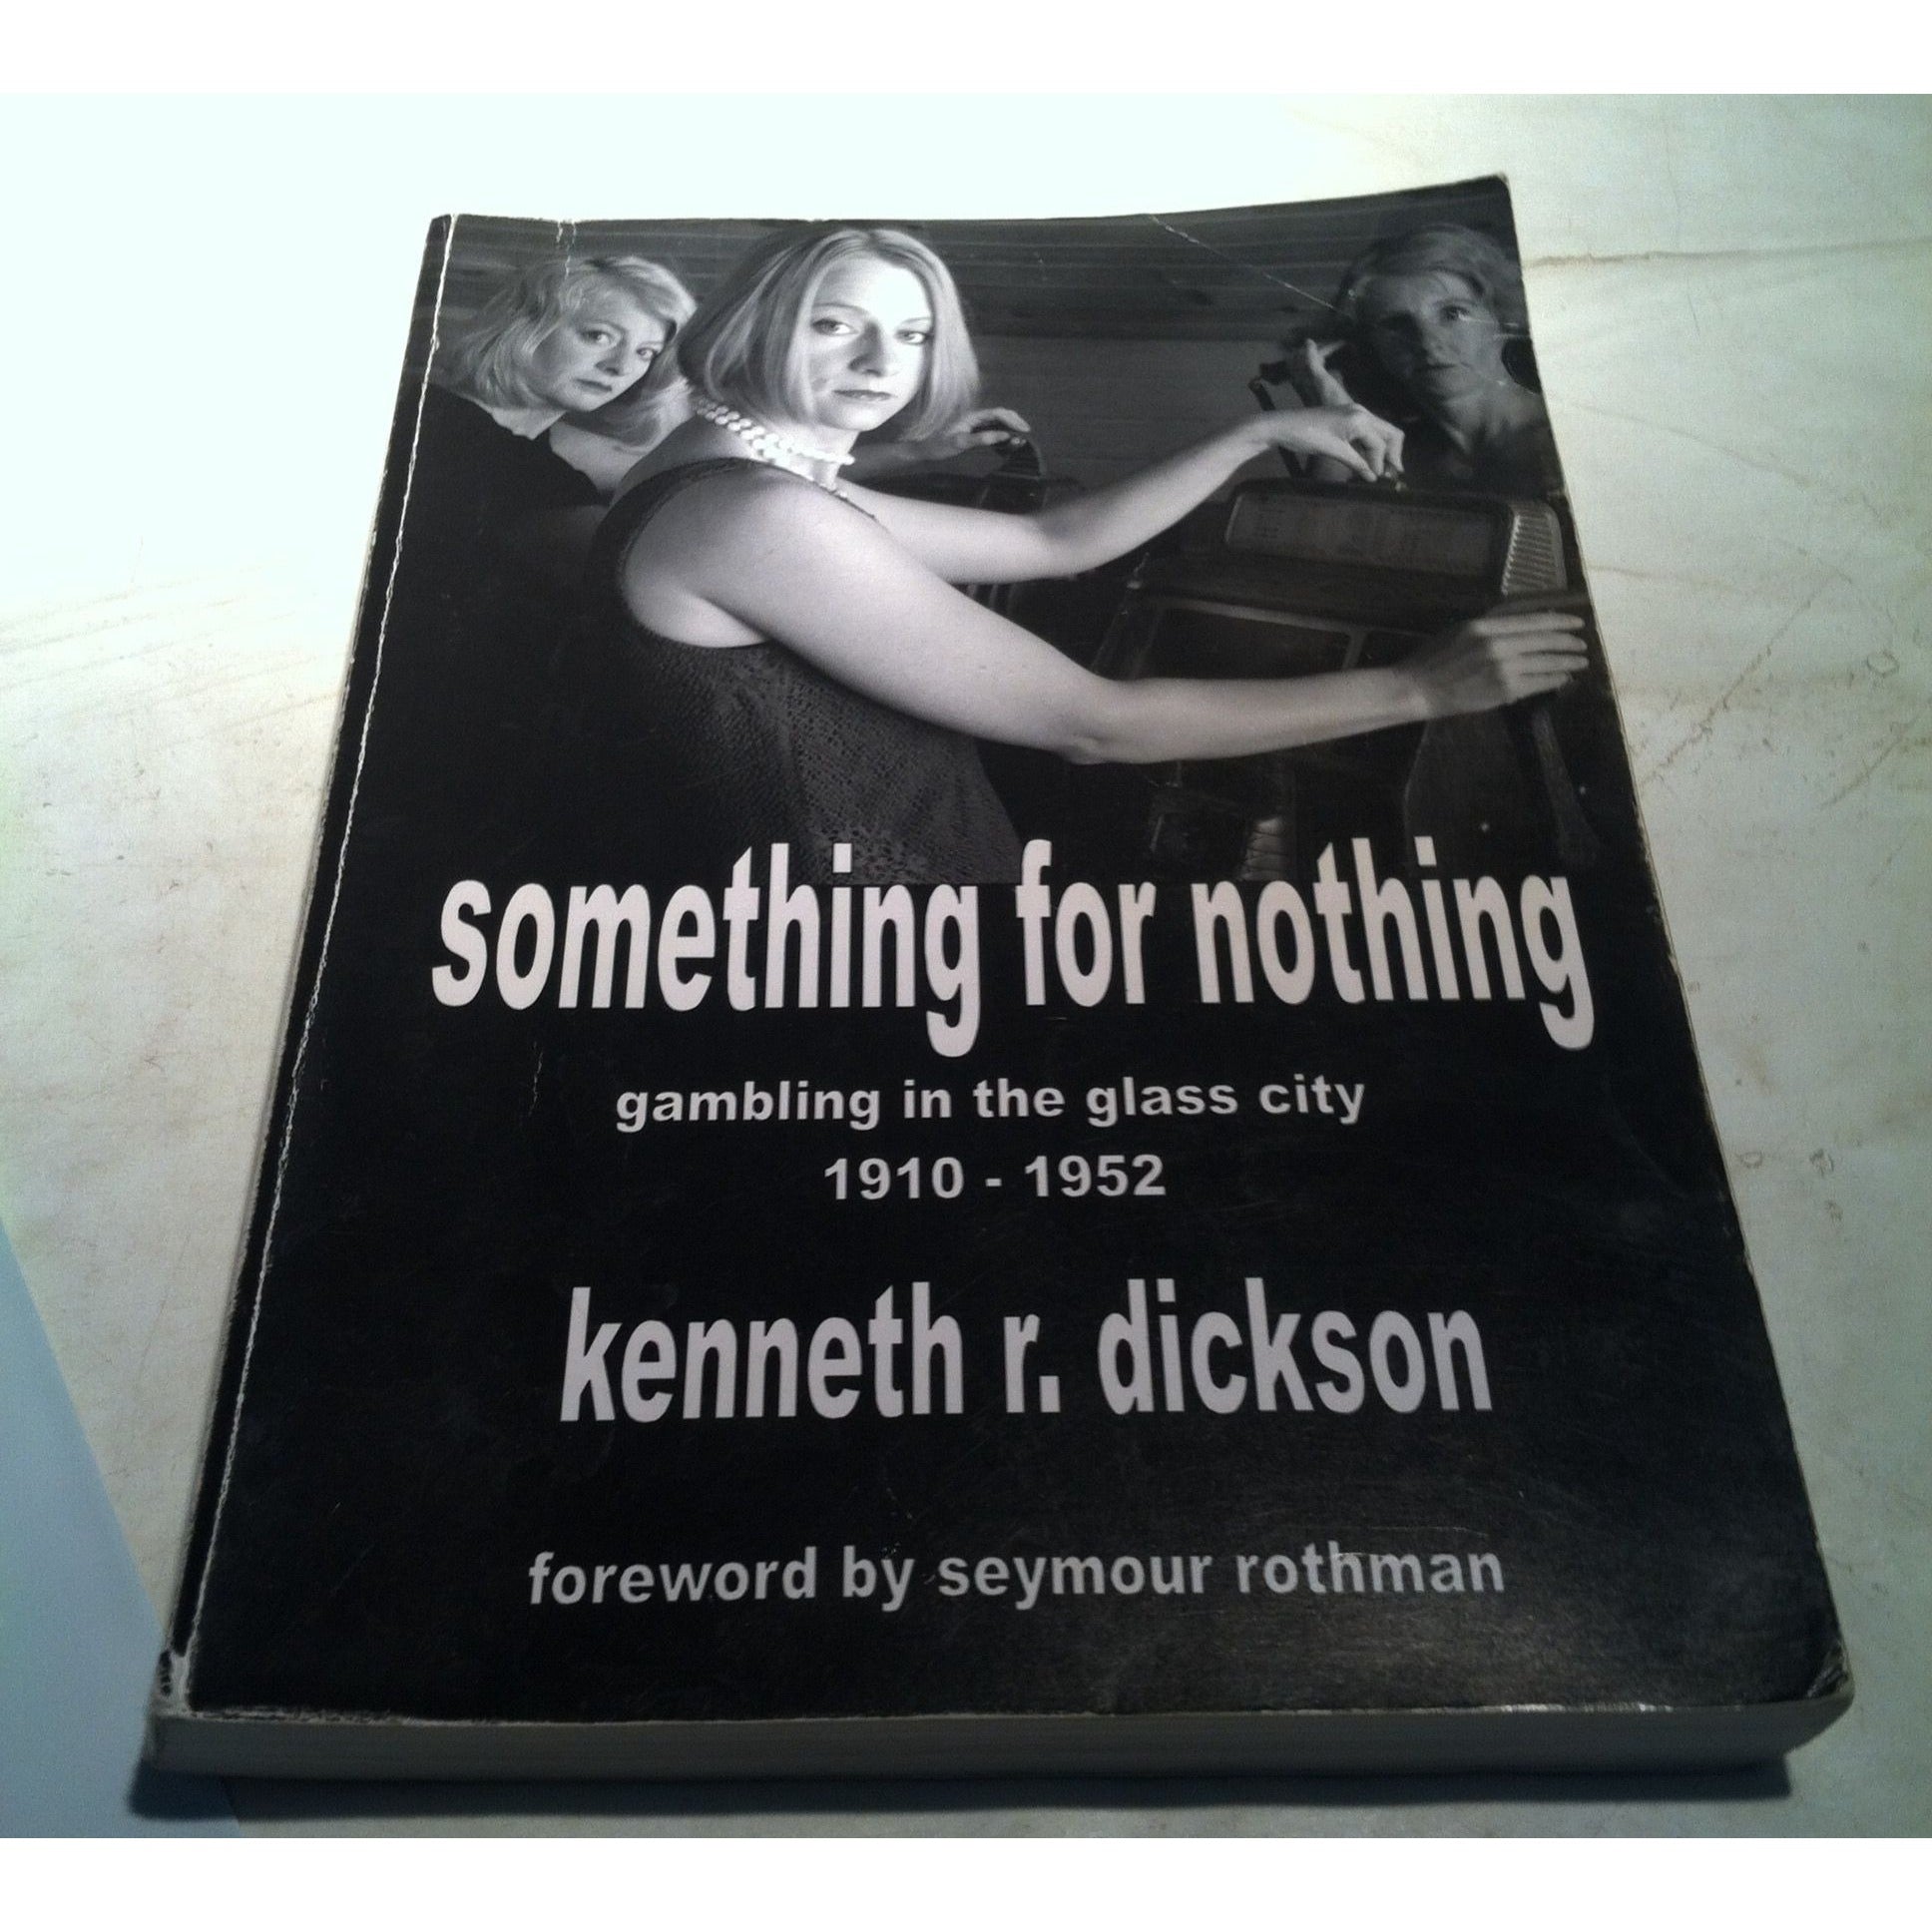 Something for nothing Gambling in the Glass City 1910-1952 Book by Kenneth R. Dickson